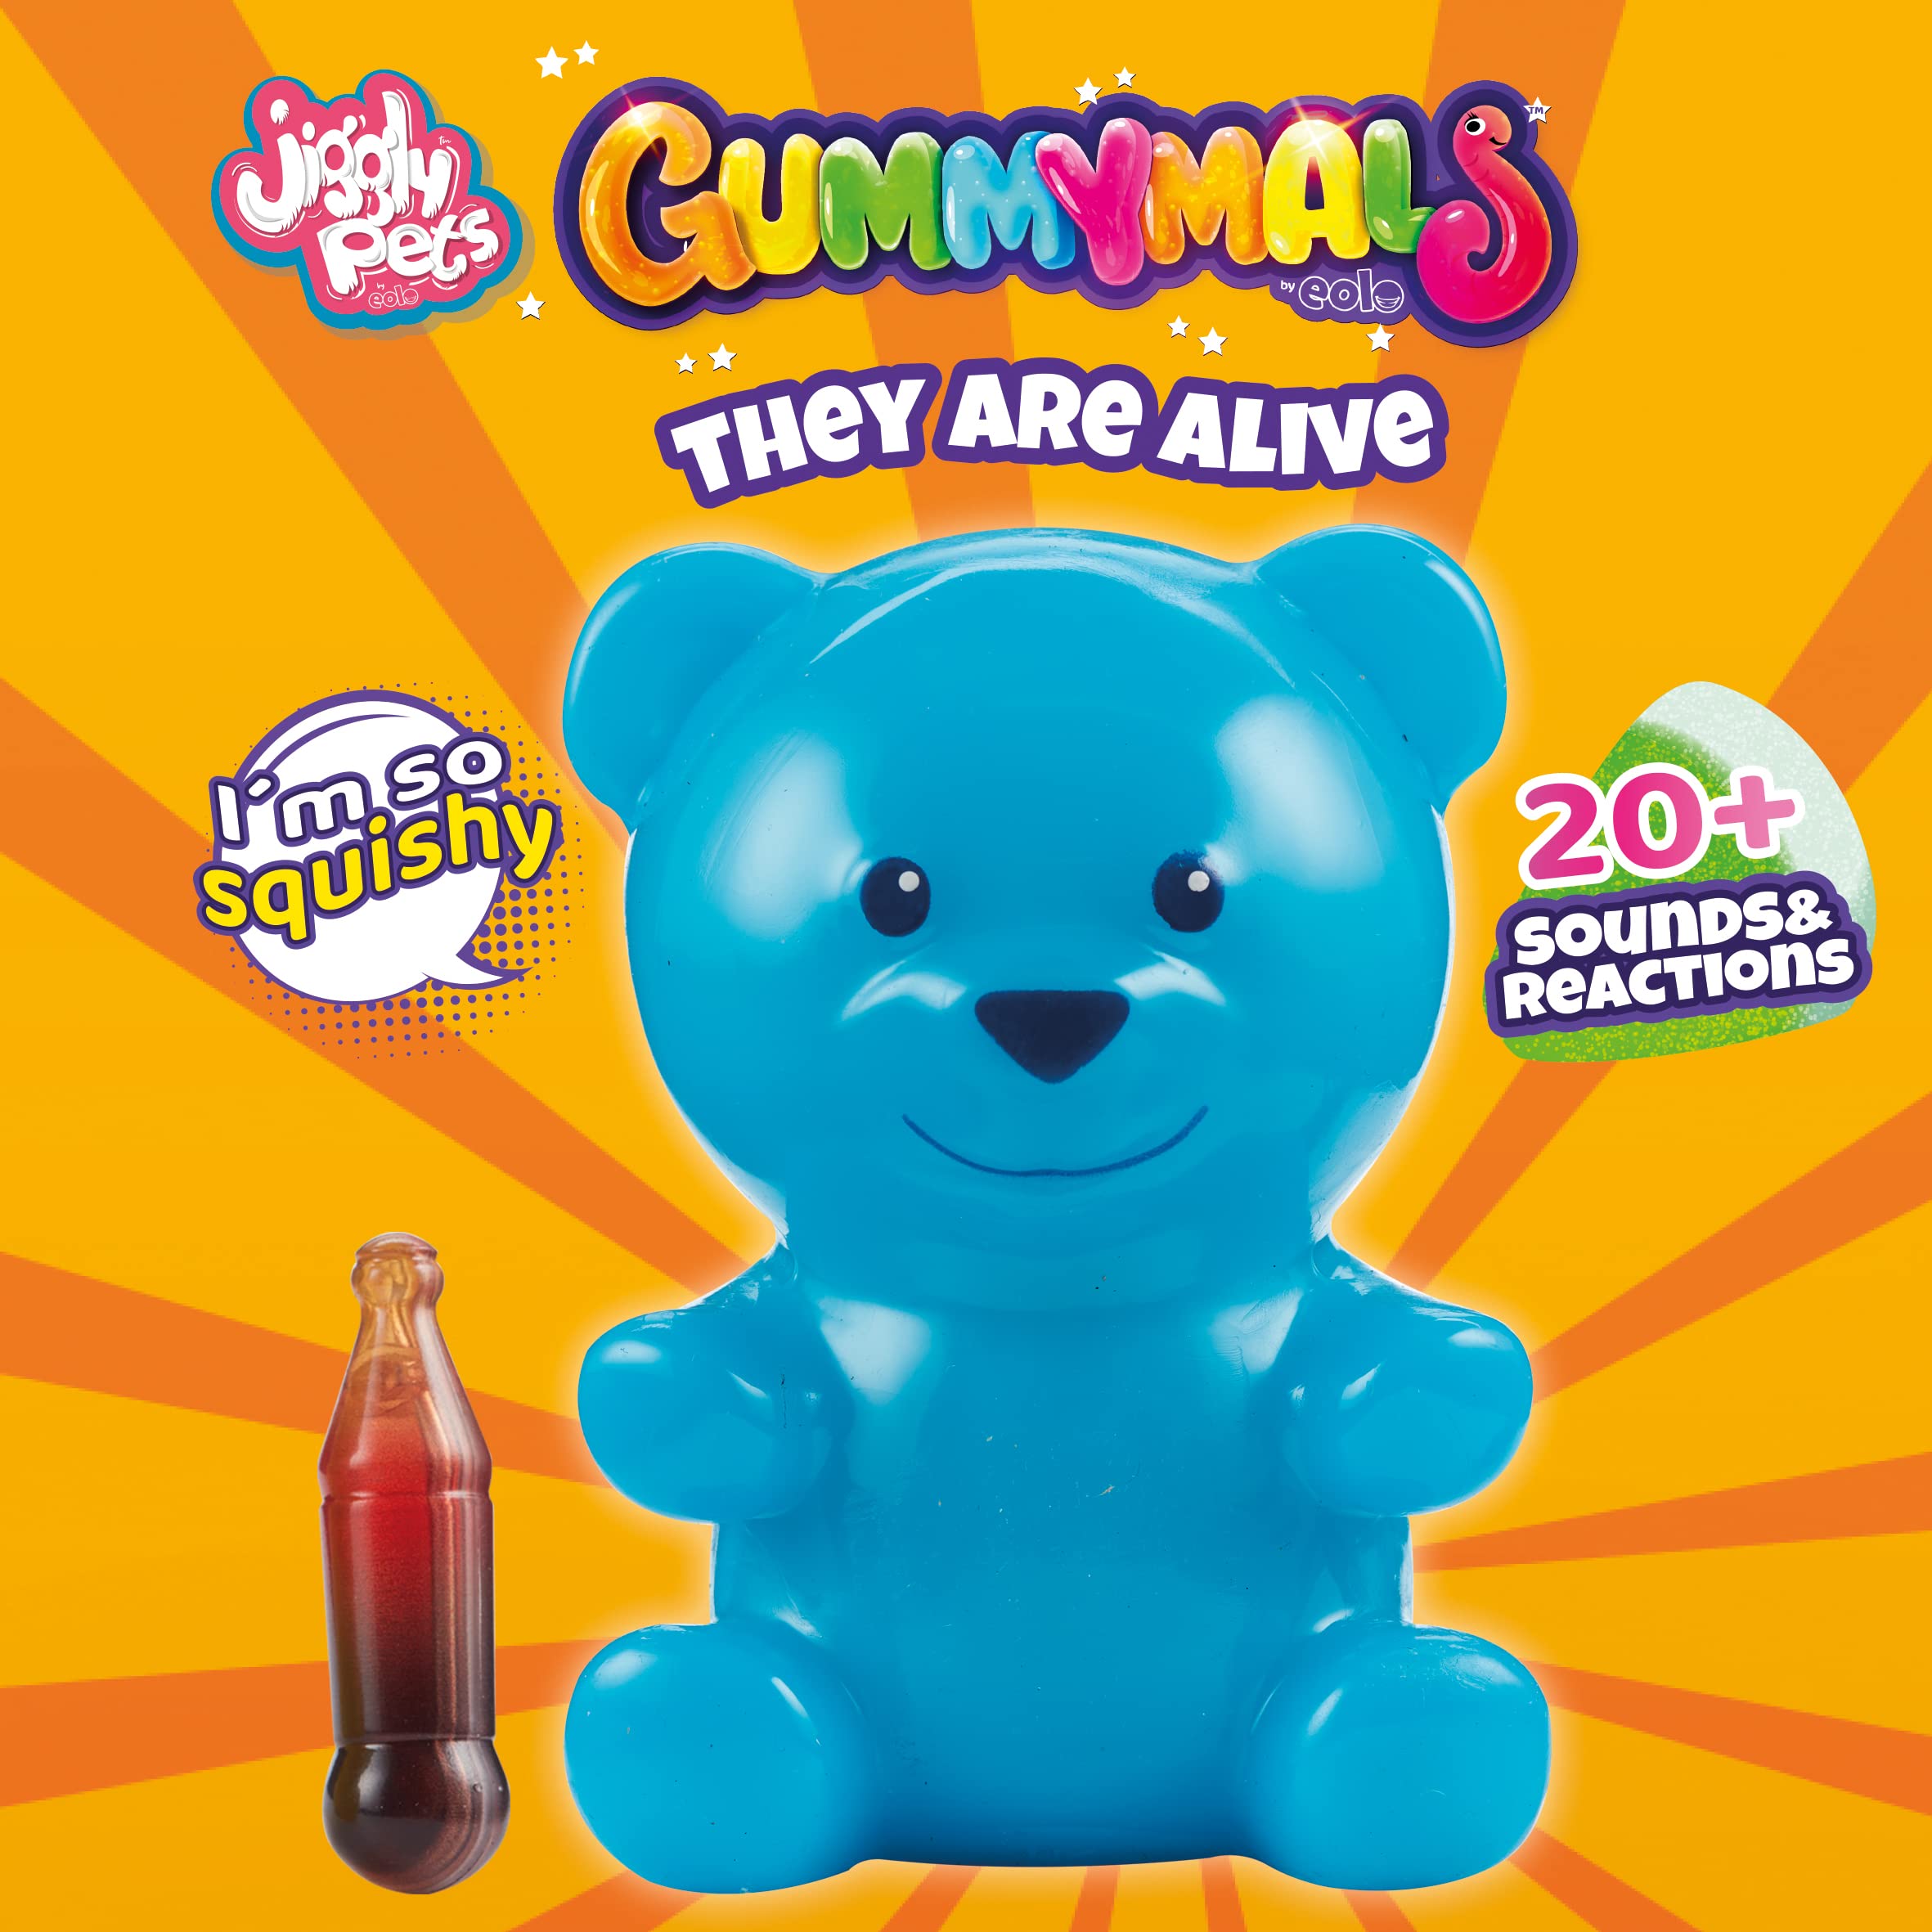 Gummymals - Interactive Blue Gummy Bear - 20+ Comments and Sounds